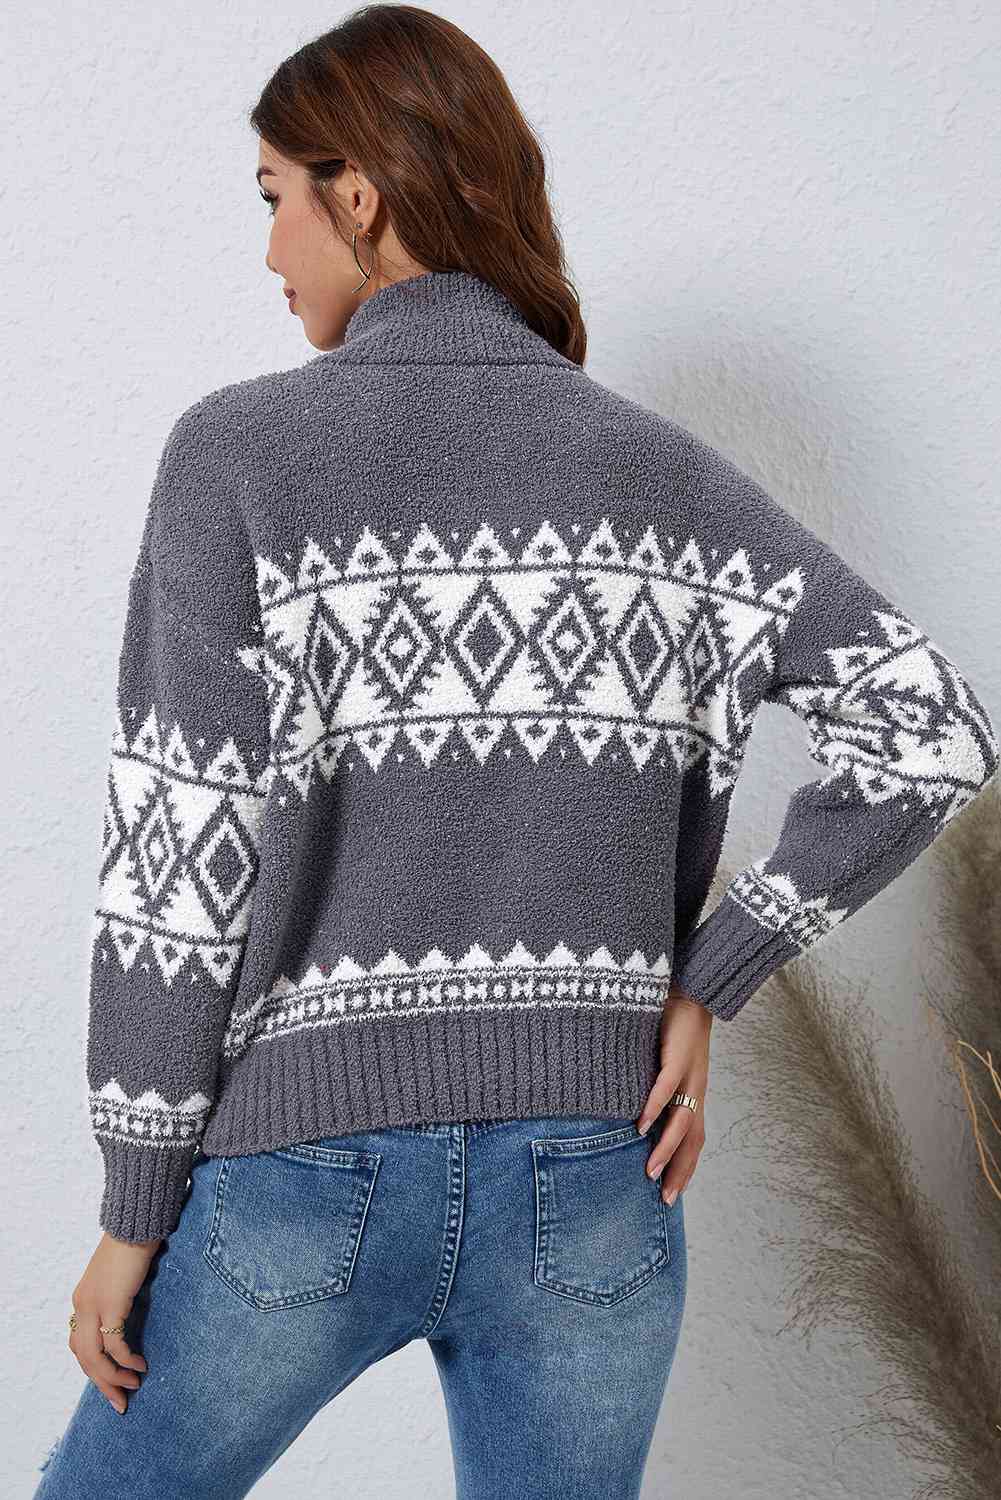 1/2 ZIP GEOMETRICAL PATTERN PULLOVER SWEATER in Charcoal back